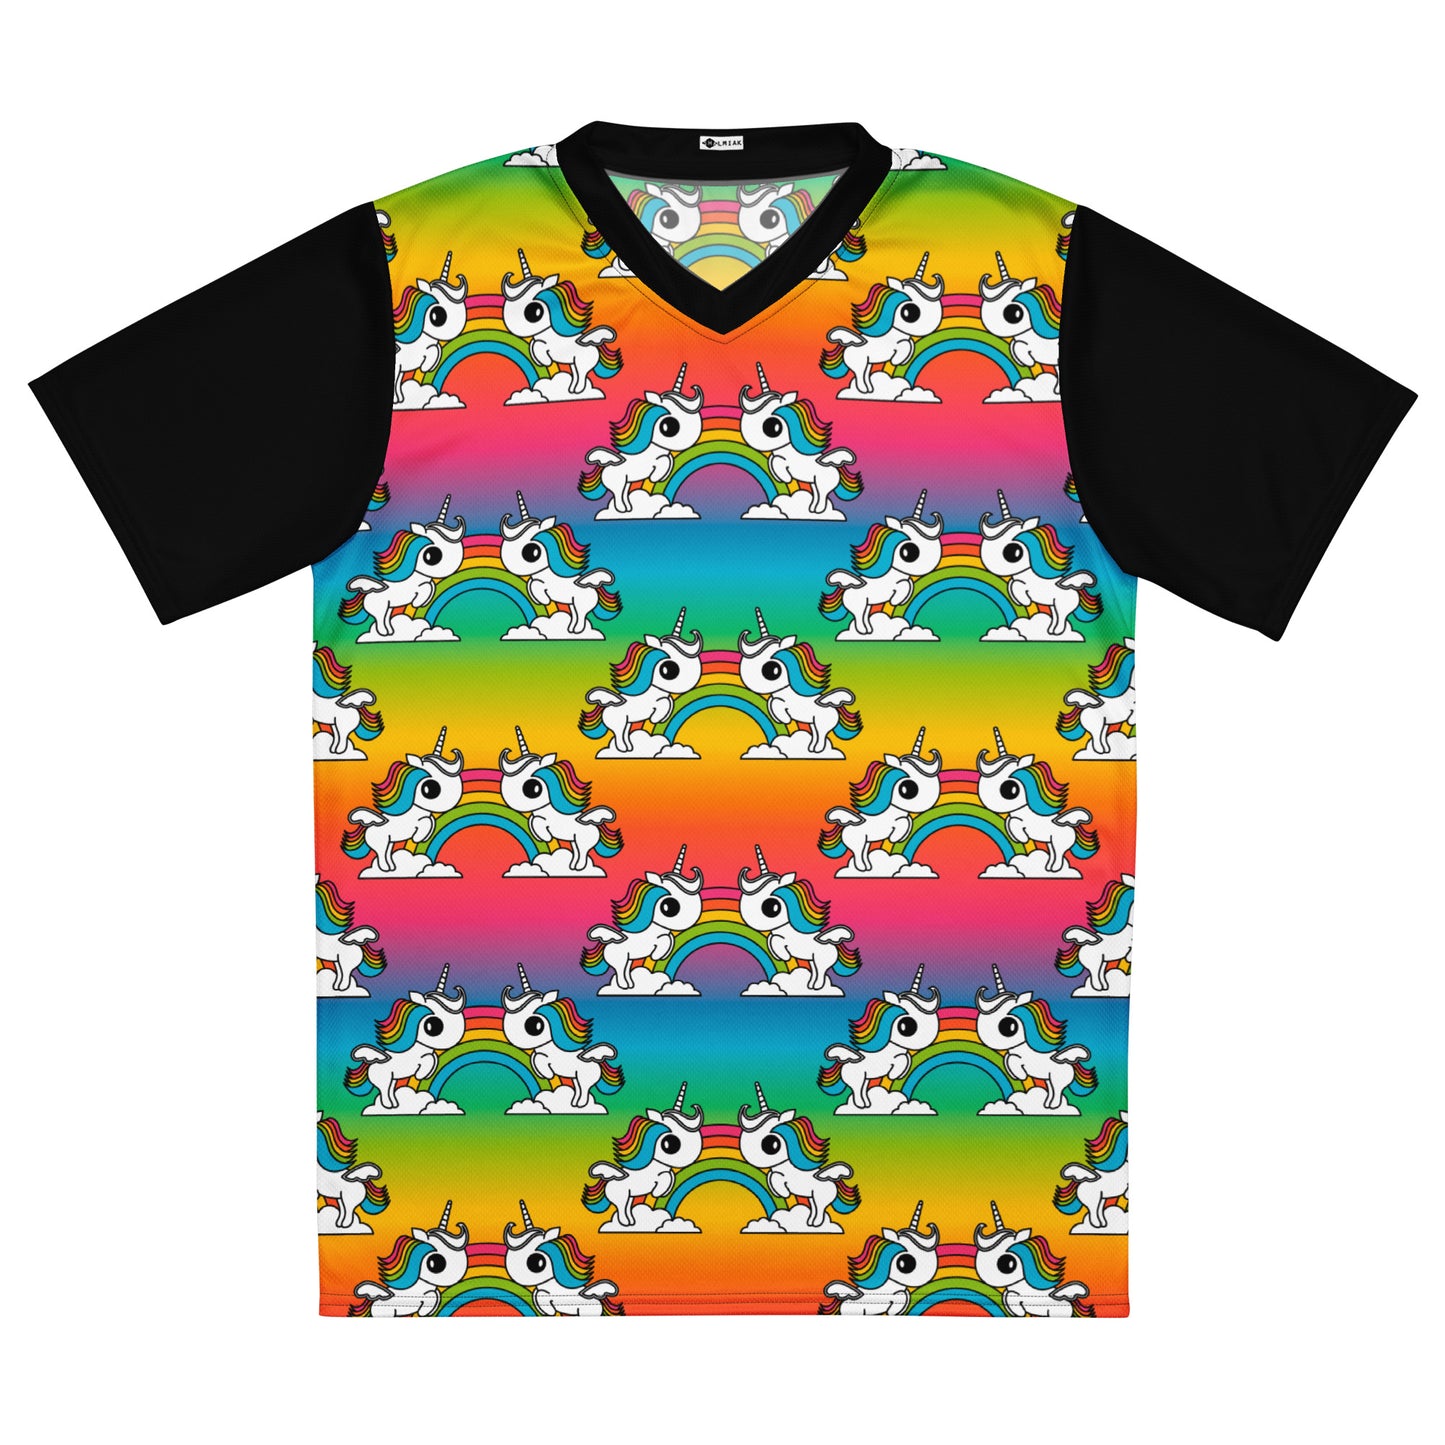 UNIQUE rainbow - Recycled unisex sports jersey